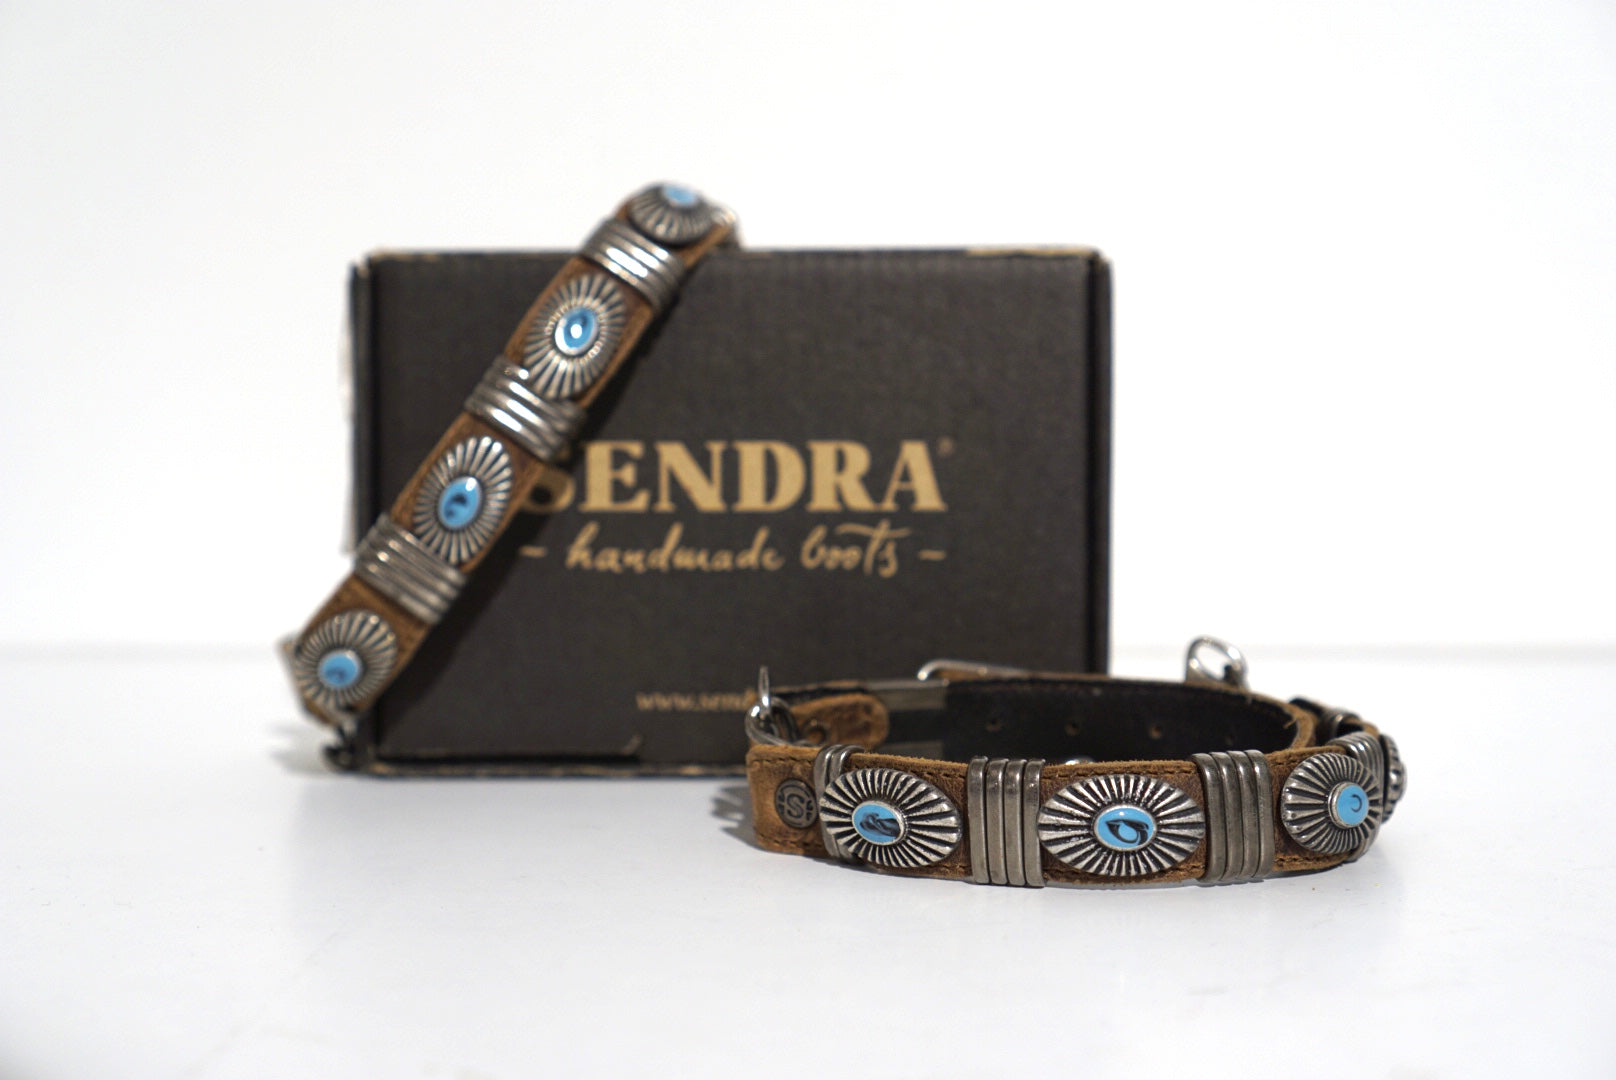 Sendra spores - light brown with turquoise concho